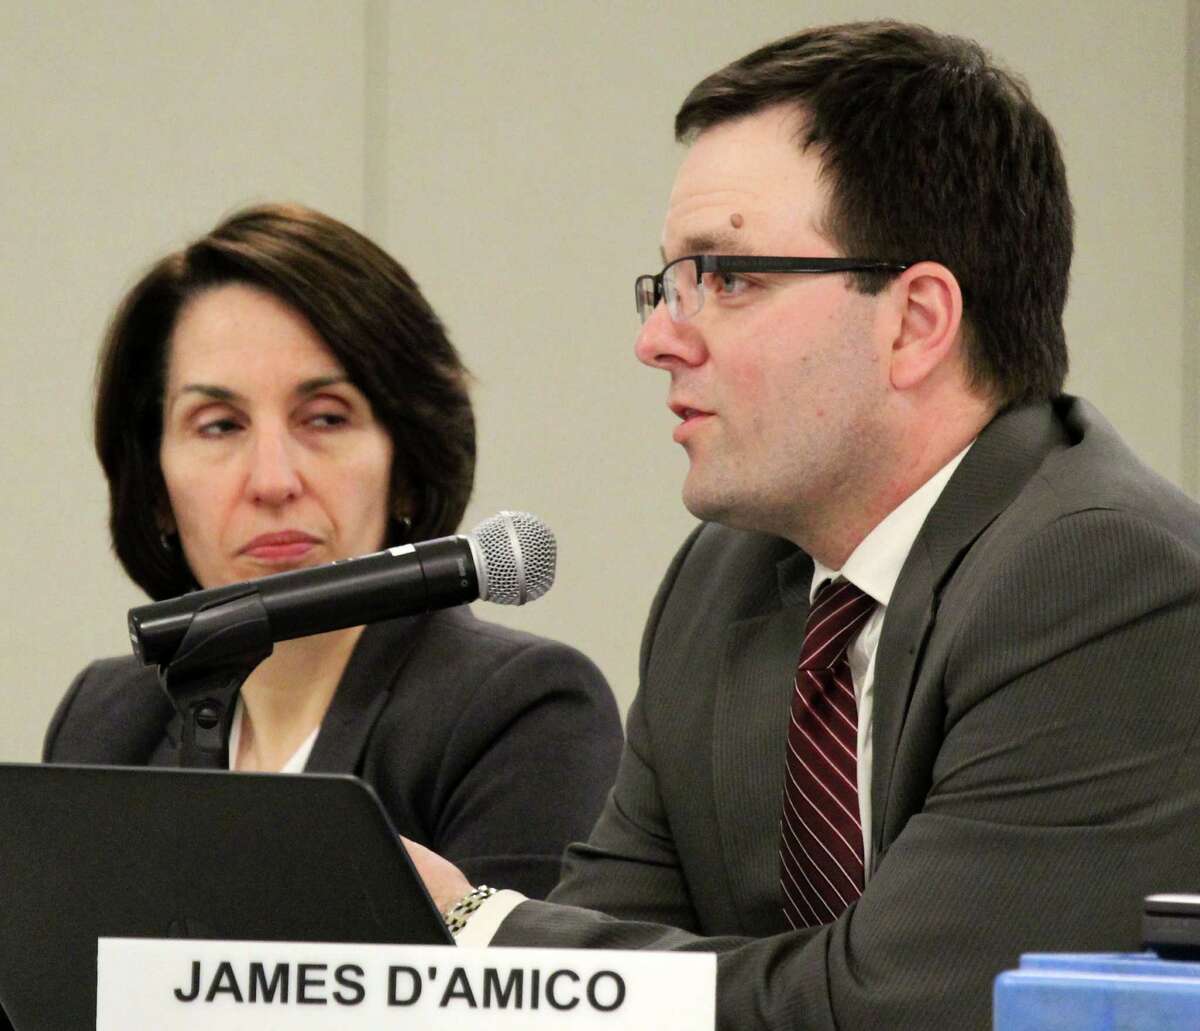 James D'Amico, the school distirct's director of secondary education who takes over the job as Staples High School principal later this spring, discusses the impact of students' social media use at Monday's Board of Education meeting.